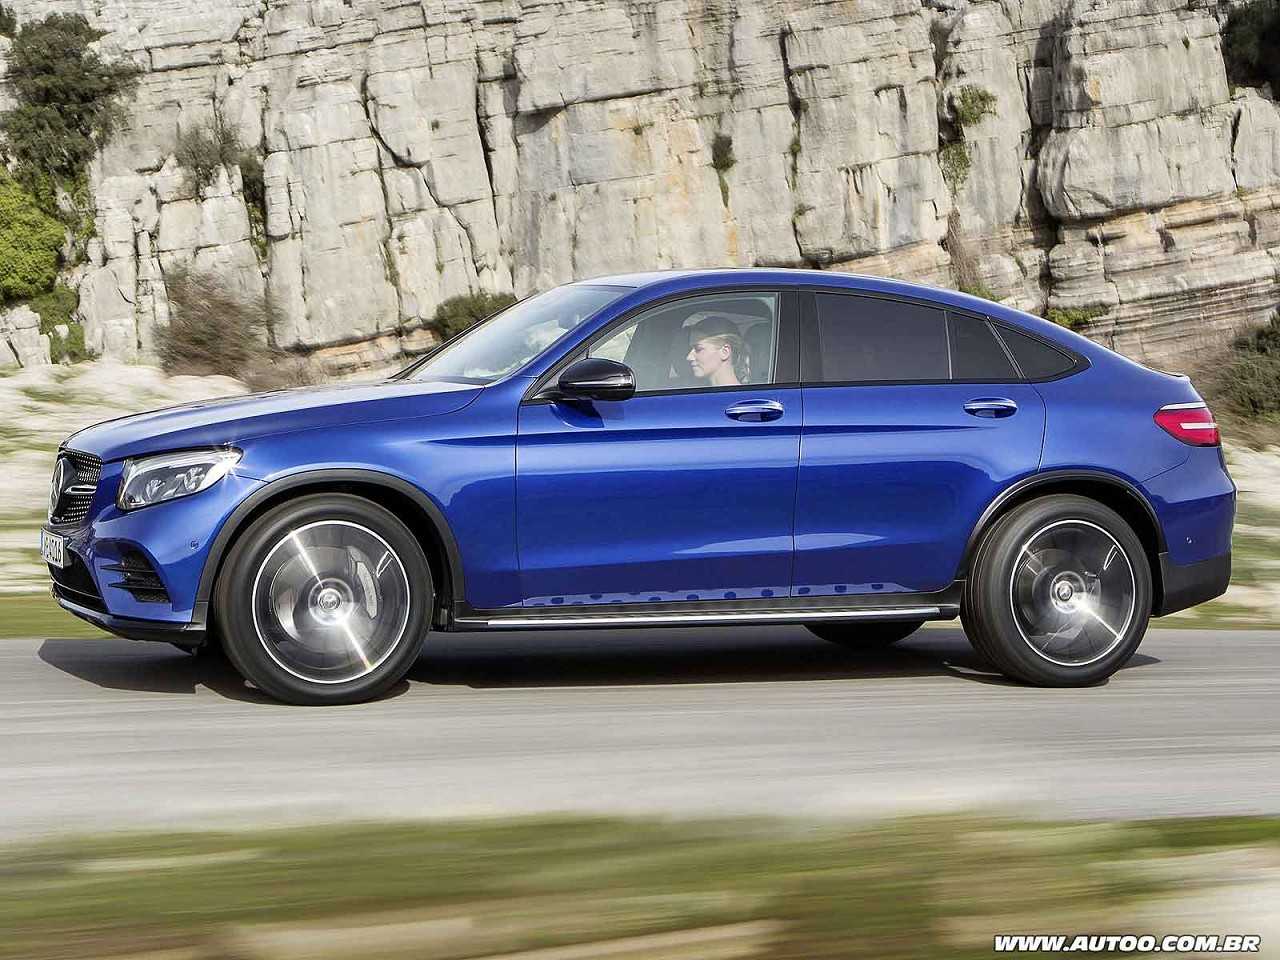 Mercedes-BenzGLC Coup 2016 - lateral